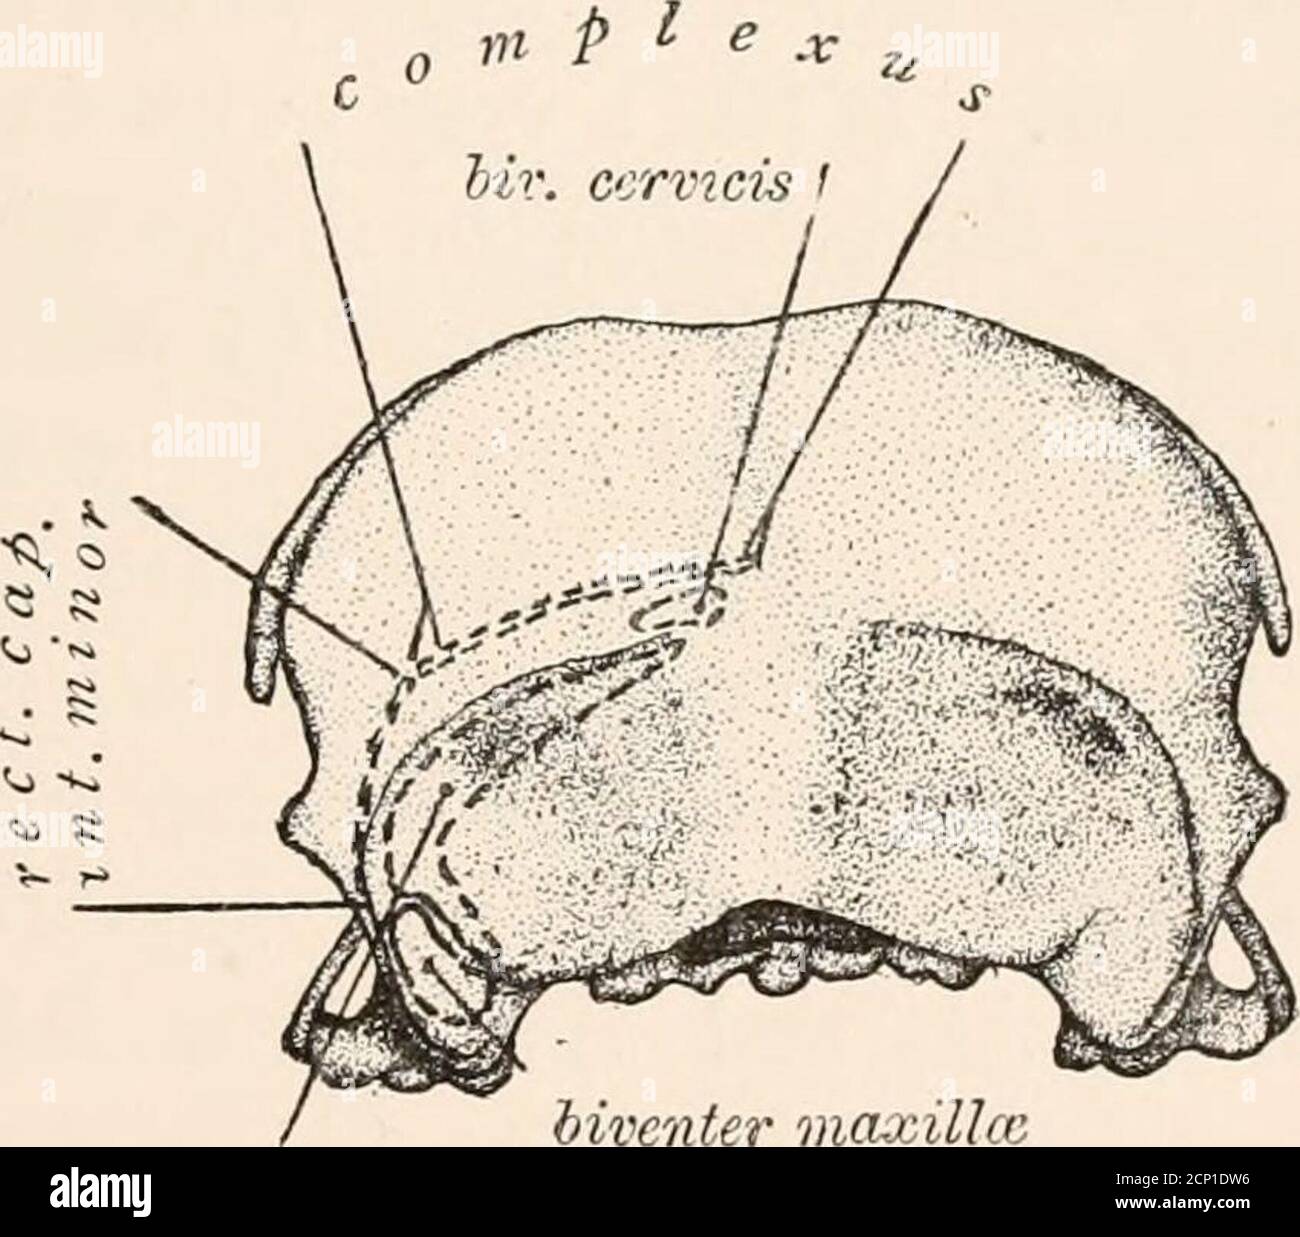 . The myology of the raven (Corvus corax sinuatus.) A guide to the study of the muscular system in birds . nbehind. It arises above from two points, viz: the ridgebounding the hinder part of the osseous ear, and secondlythe depression to its mesial side. The two heads almostimmediately blend as they pass downwards and forwards,as a curved fleshy mass, to become inserted into theposterior aspect of the articular end of the mandible,including the angle (Figs. 4 and 7). To study thismuscle properly it should be transversely divided acrossits belly at about its middle ; the two extremities may THE Stock Photo